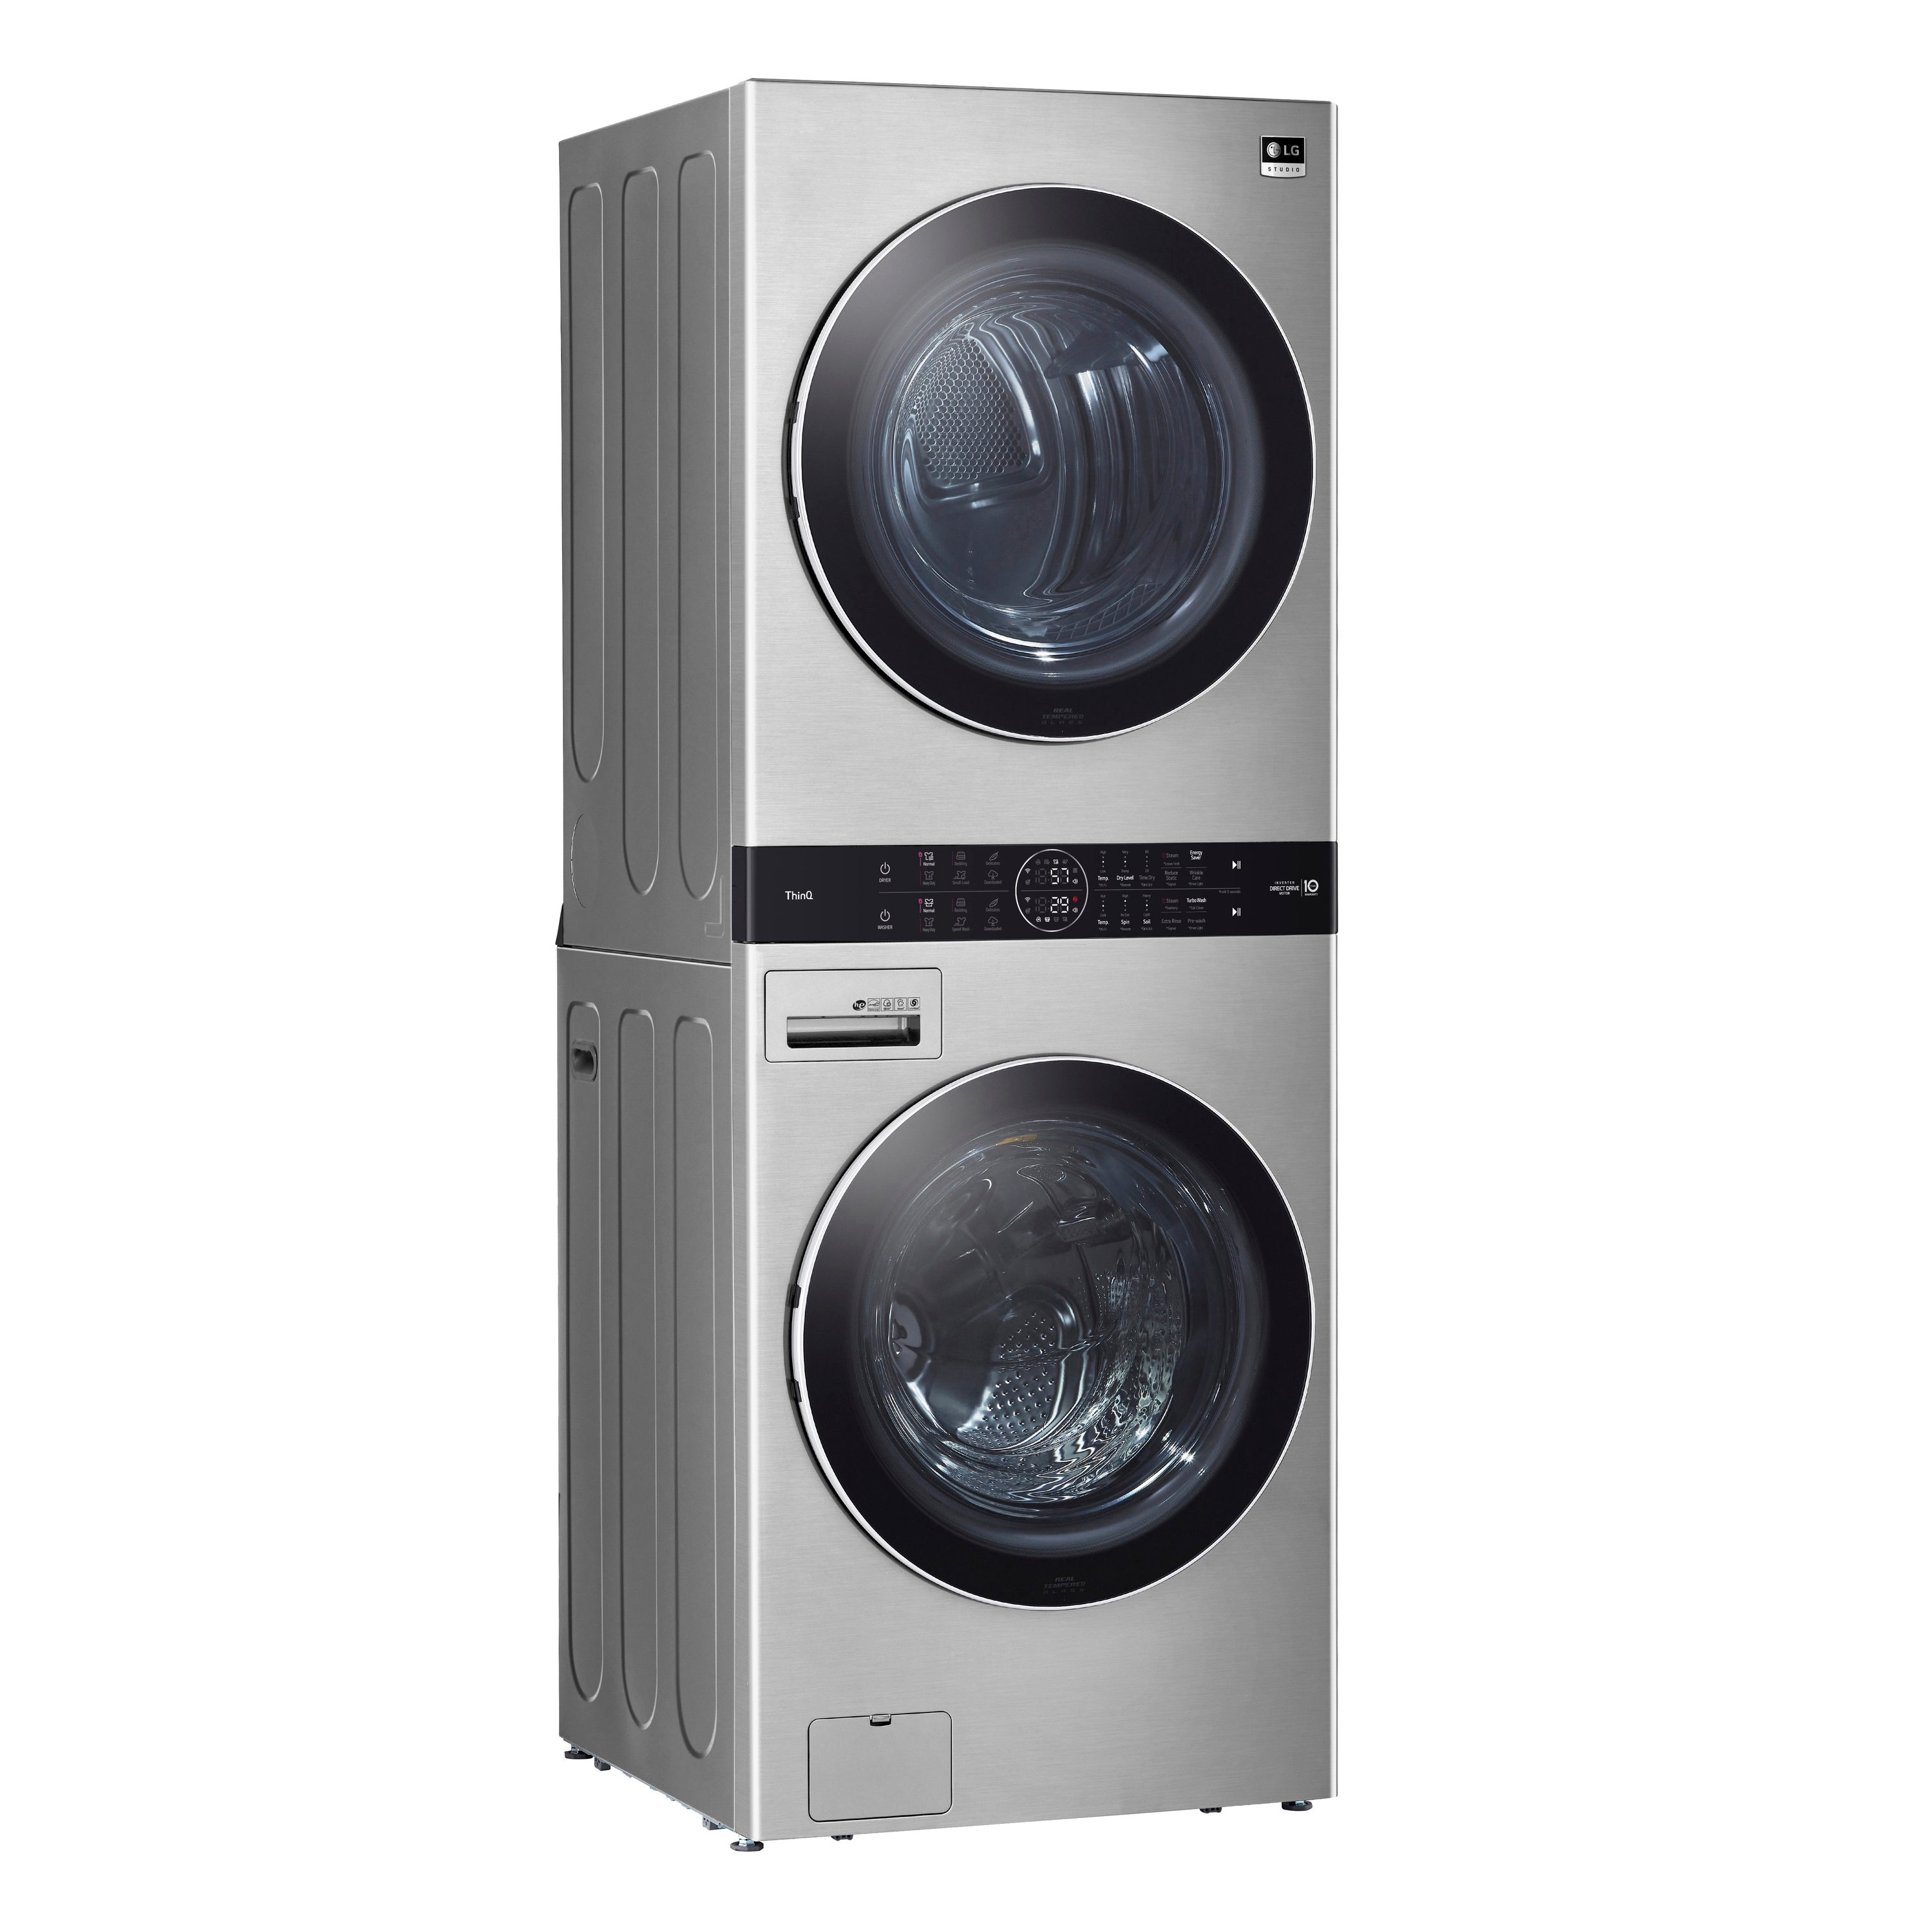 STAR) Center Dryer ft with ft Wash department the LG 5-cu STUDIO Washer Laundry Gas (ENERGY Laundry in Tower and Stacked Centers 7.4-cu Stacked at